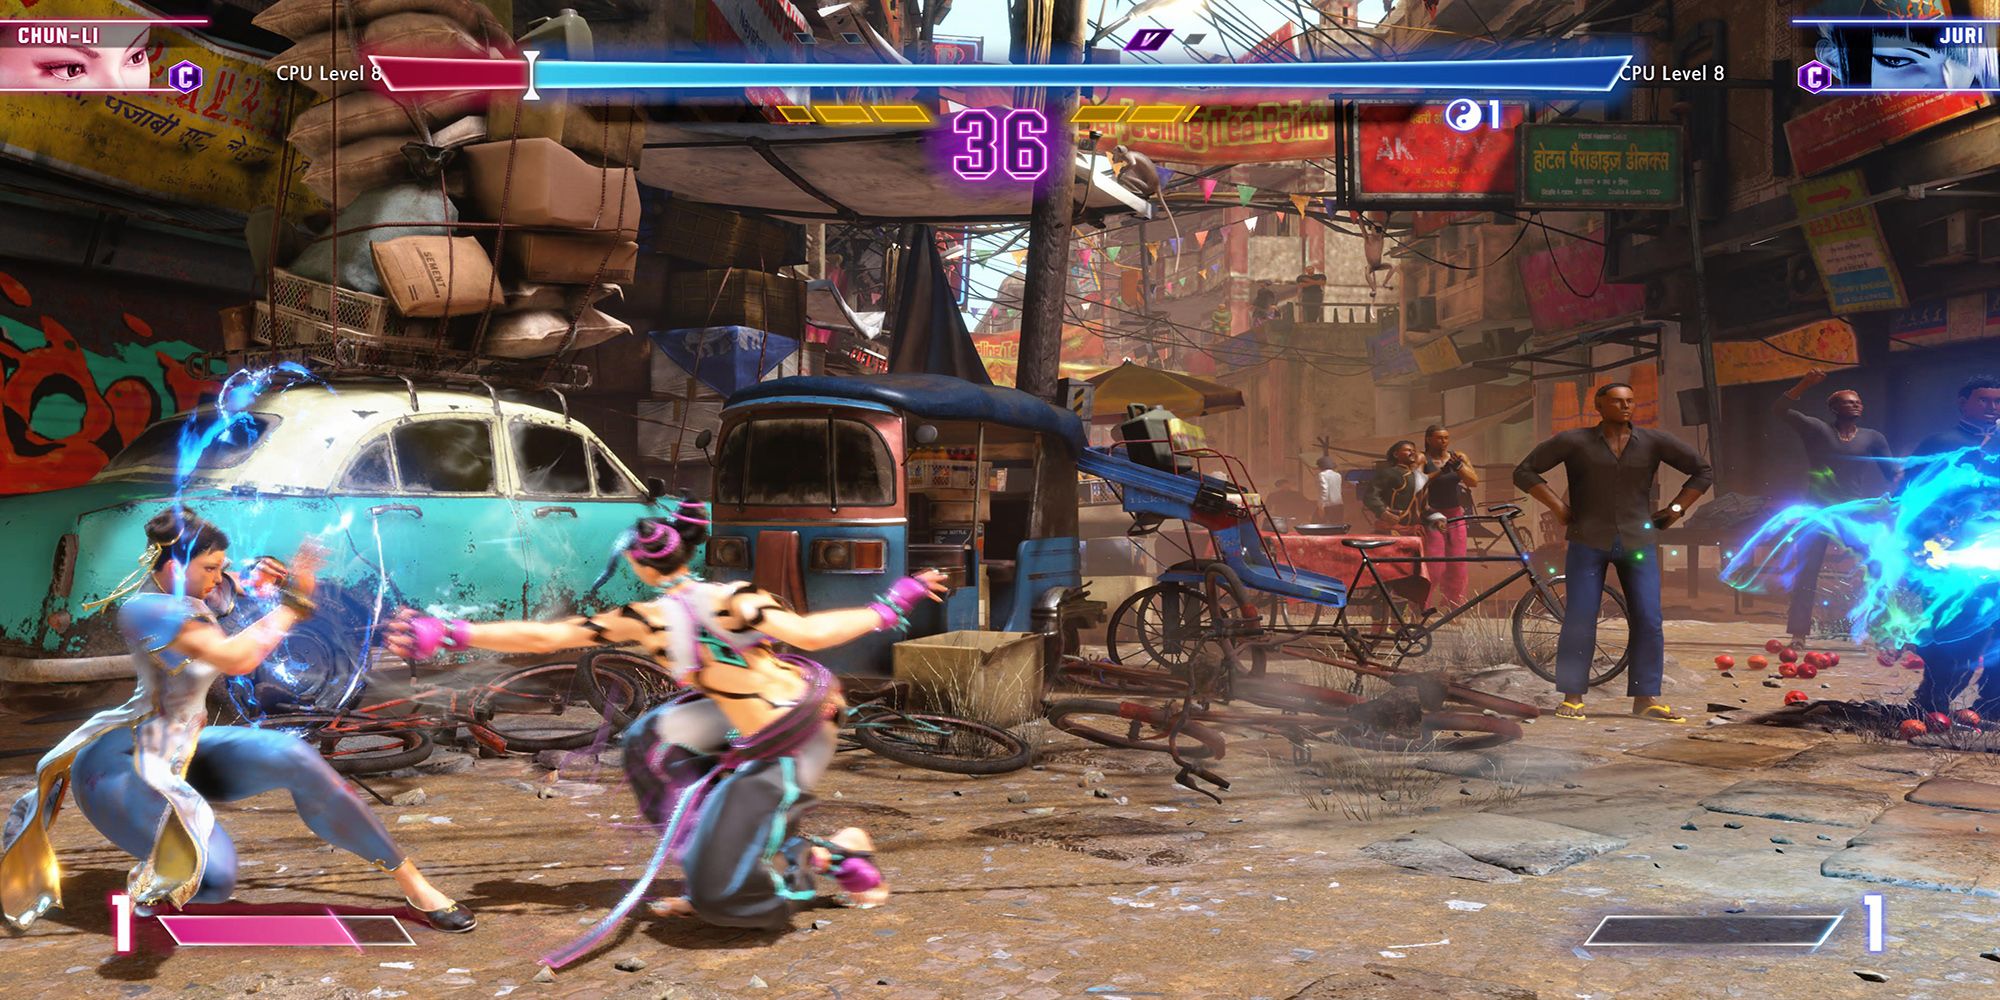 Chun-li guards against Juri's punches during a Back And Forth match at Old Town Market in Street Fighter 6.